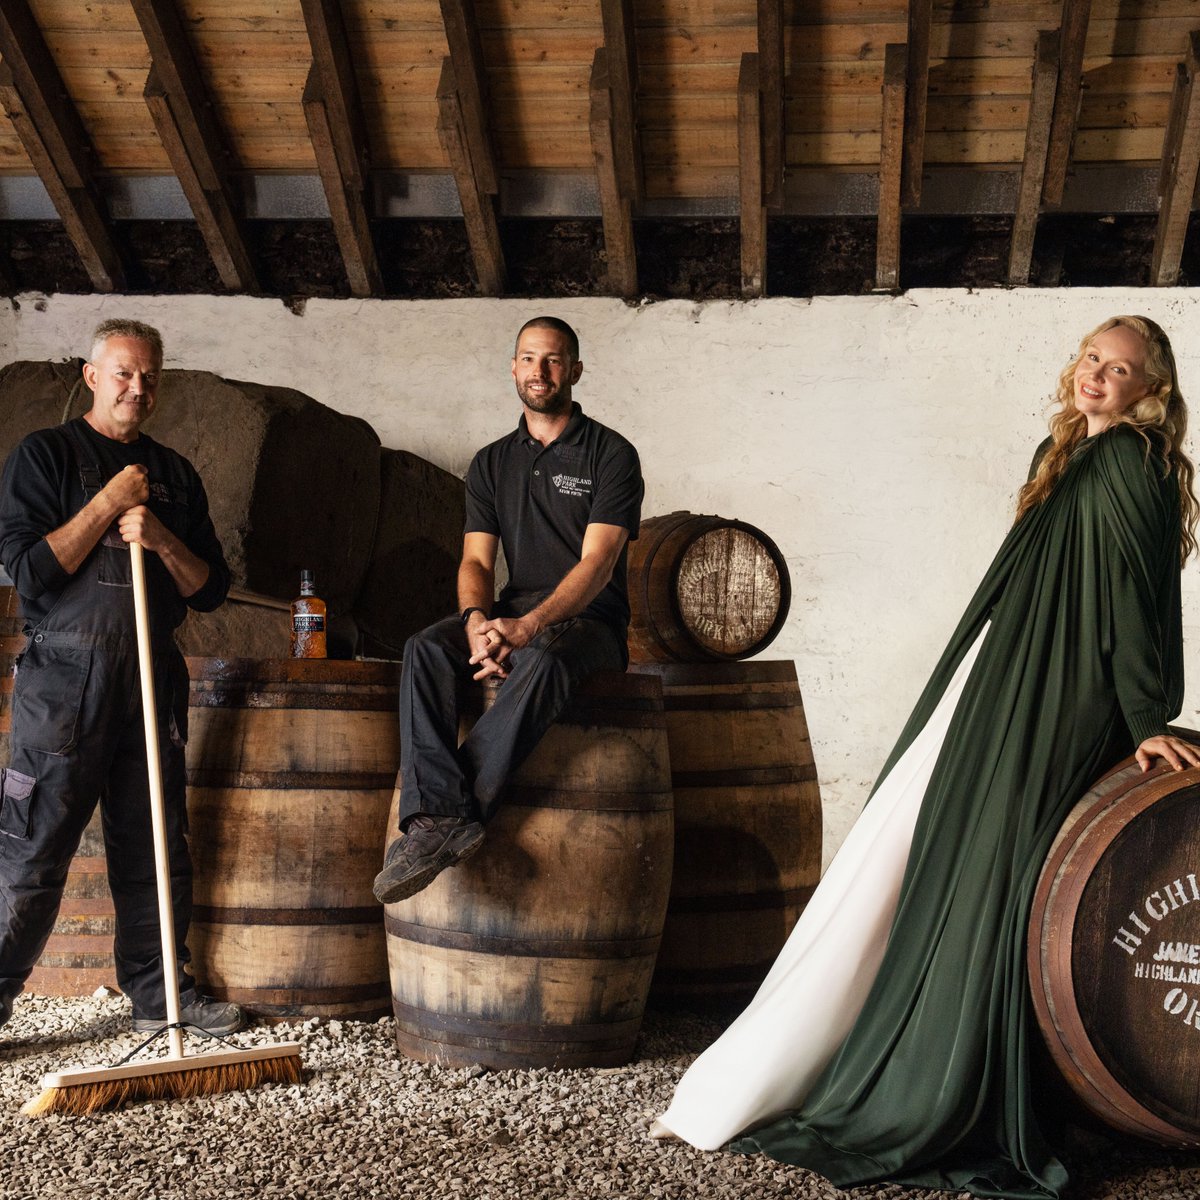 For over 200 years, the extraordinary Orkney islands have nurtured the distinctive spirit of Highland Park Whisky. Discover #OrkneyStories on the Highland Park website: highlandparkwhisky.com/orkney-stories Enjoy responsibly. #HighlandParkWhisky #GwendolineChristie